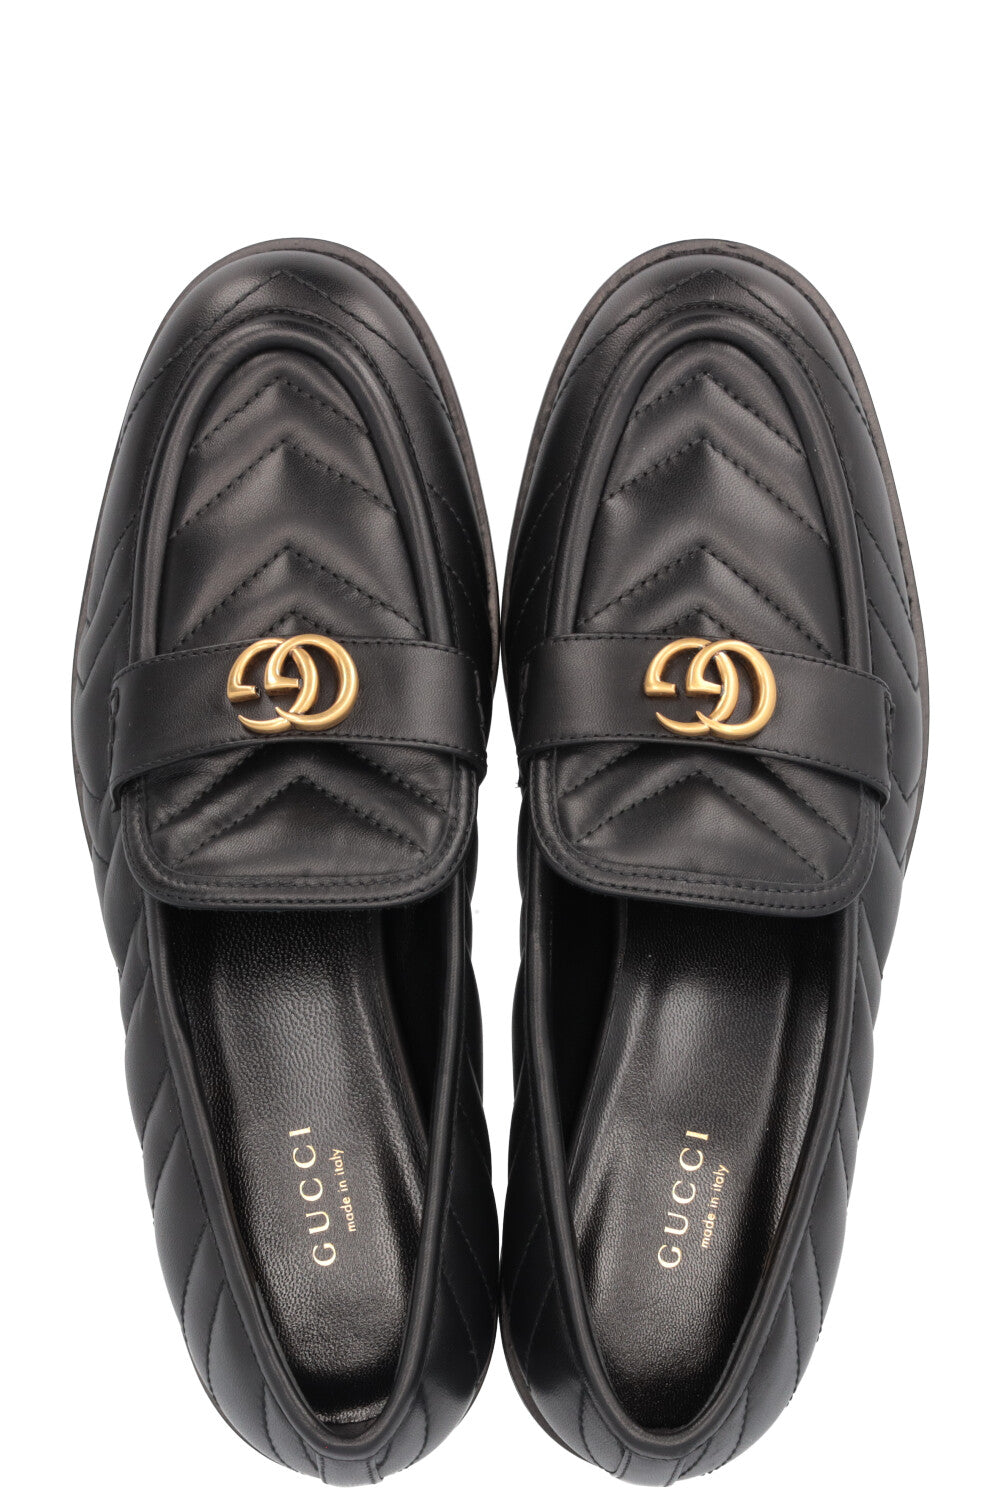 GUCCI Marmont Quilted Leather Loafers Black